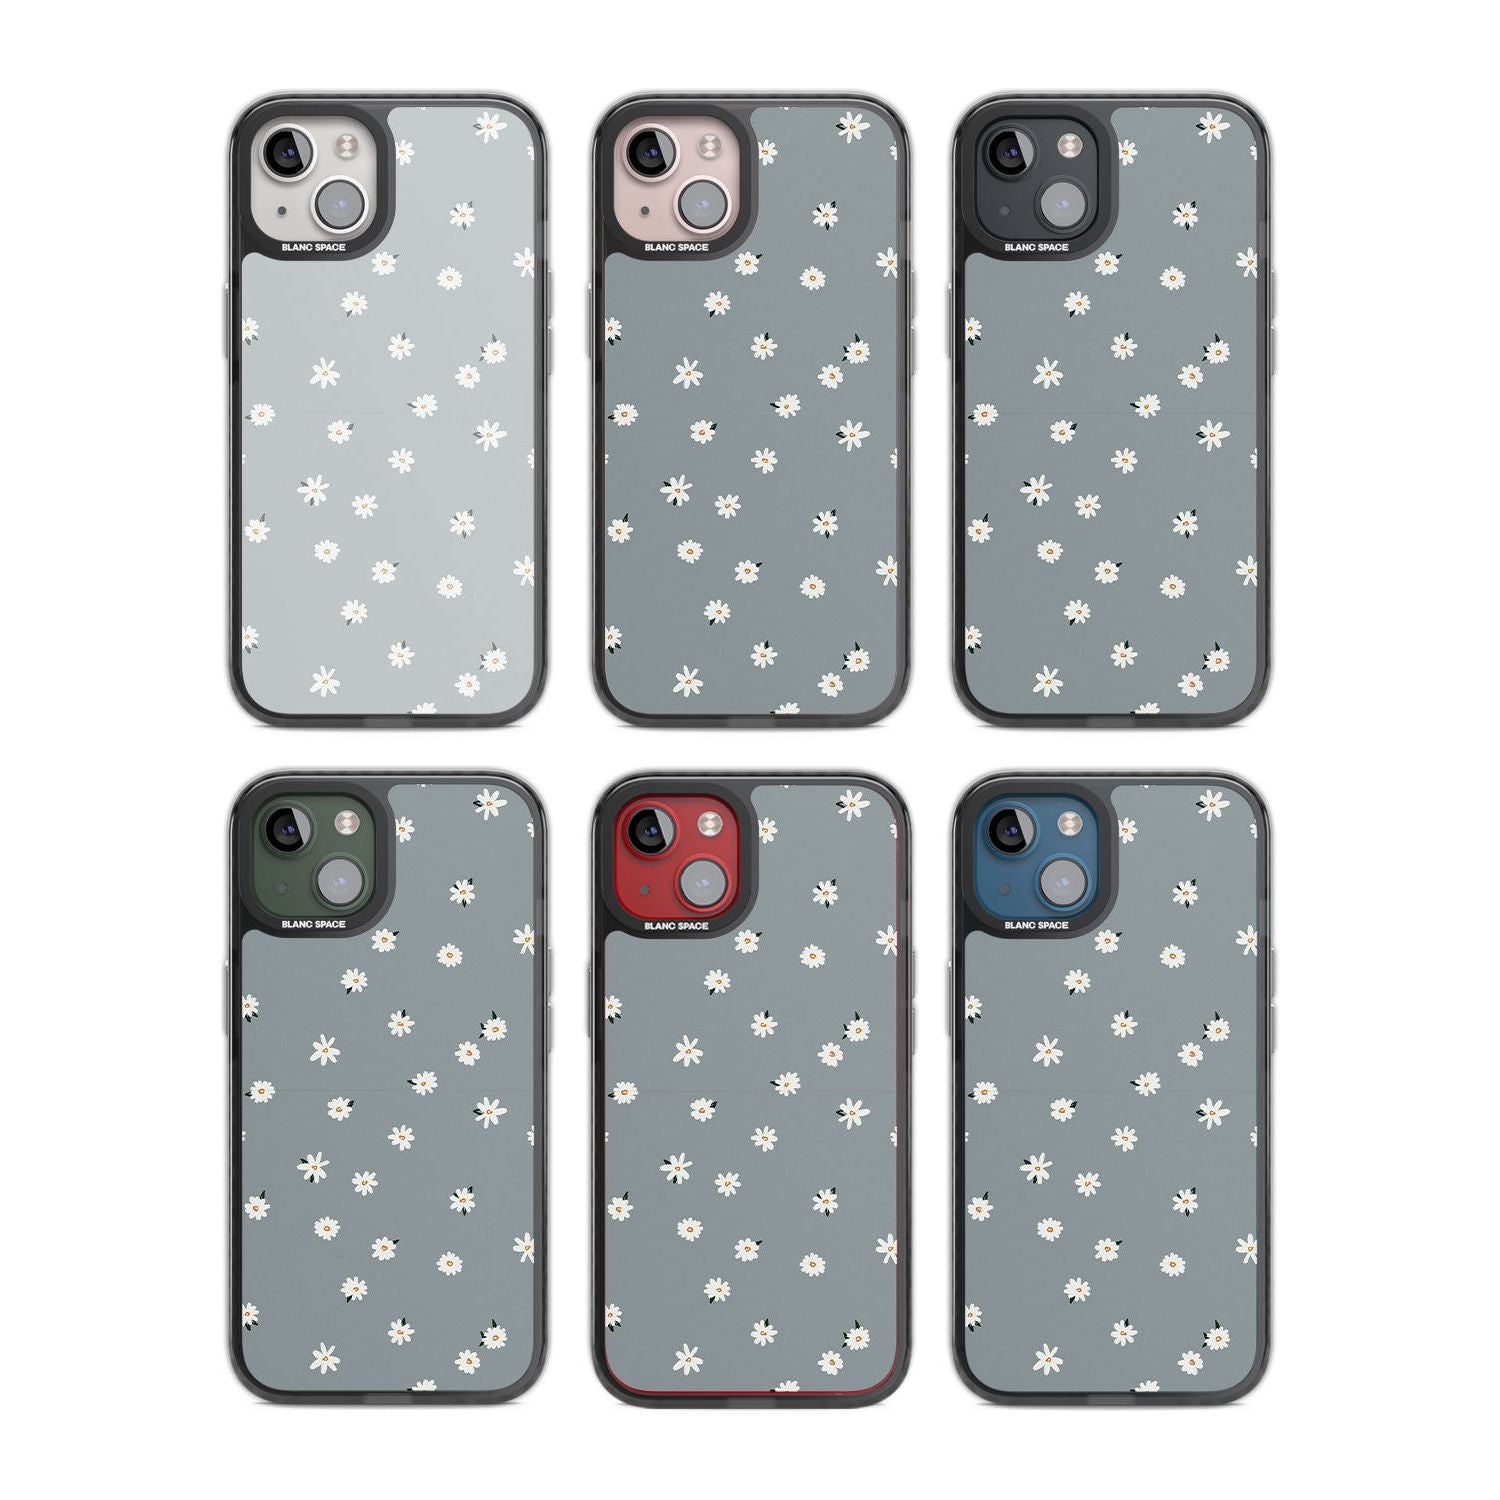 Painted Daisy Blue-Grey Cute Phone Case iPhone 15 Pro Max / Black Impact Case,iPhone 15 Plus / Black Impact Case,iPhone 15 Pro / Black Impact Case,iPhone 15 / Black Impact Case,iPhone 15 Pro Max / Impact Case,iPhone 15 Plus / Impact Case,iPhone 15 Pro / Impact Case,iPhone 15 / Impact Case,iPhone 15 Pro Max / Magsafe Black Impact Case,iPhone 15 Plus / Magsafe Black Impact Case,iPhone 15 Pro / Magsafe Black Impact Case,iPhone 15 / Magsafe Black Impact Case,iPhone 14 Pro Max / Black Impact Case,iPhone 14 Plus 